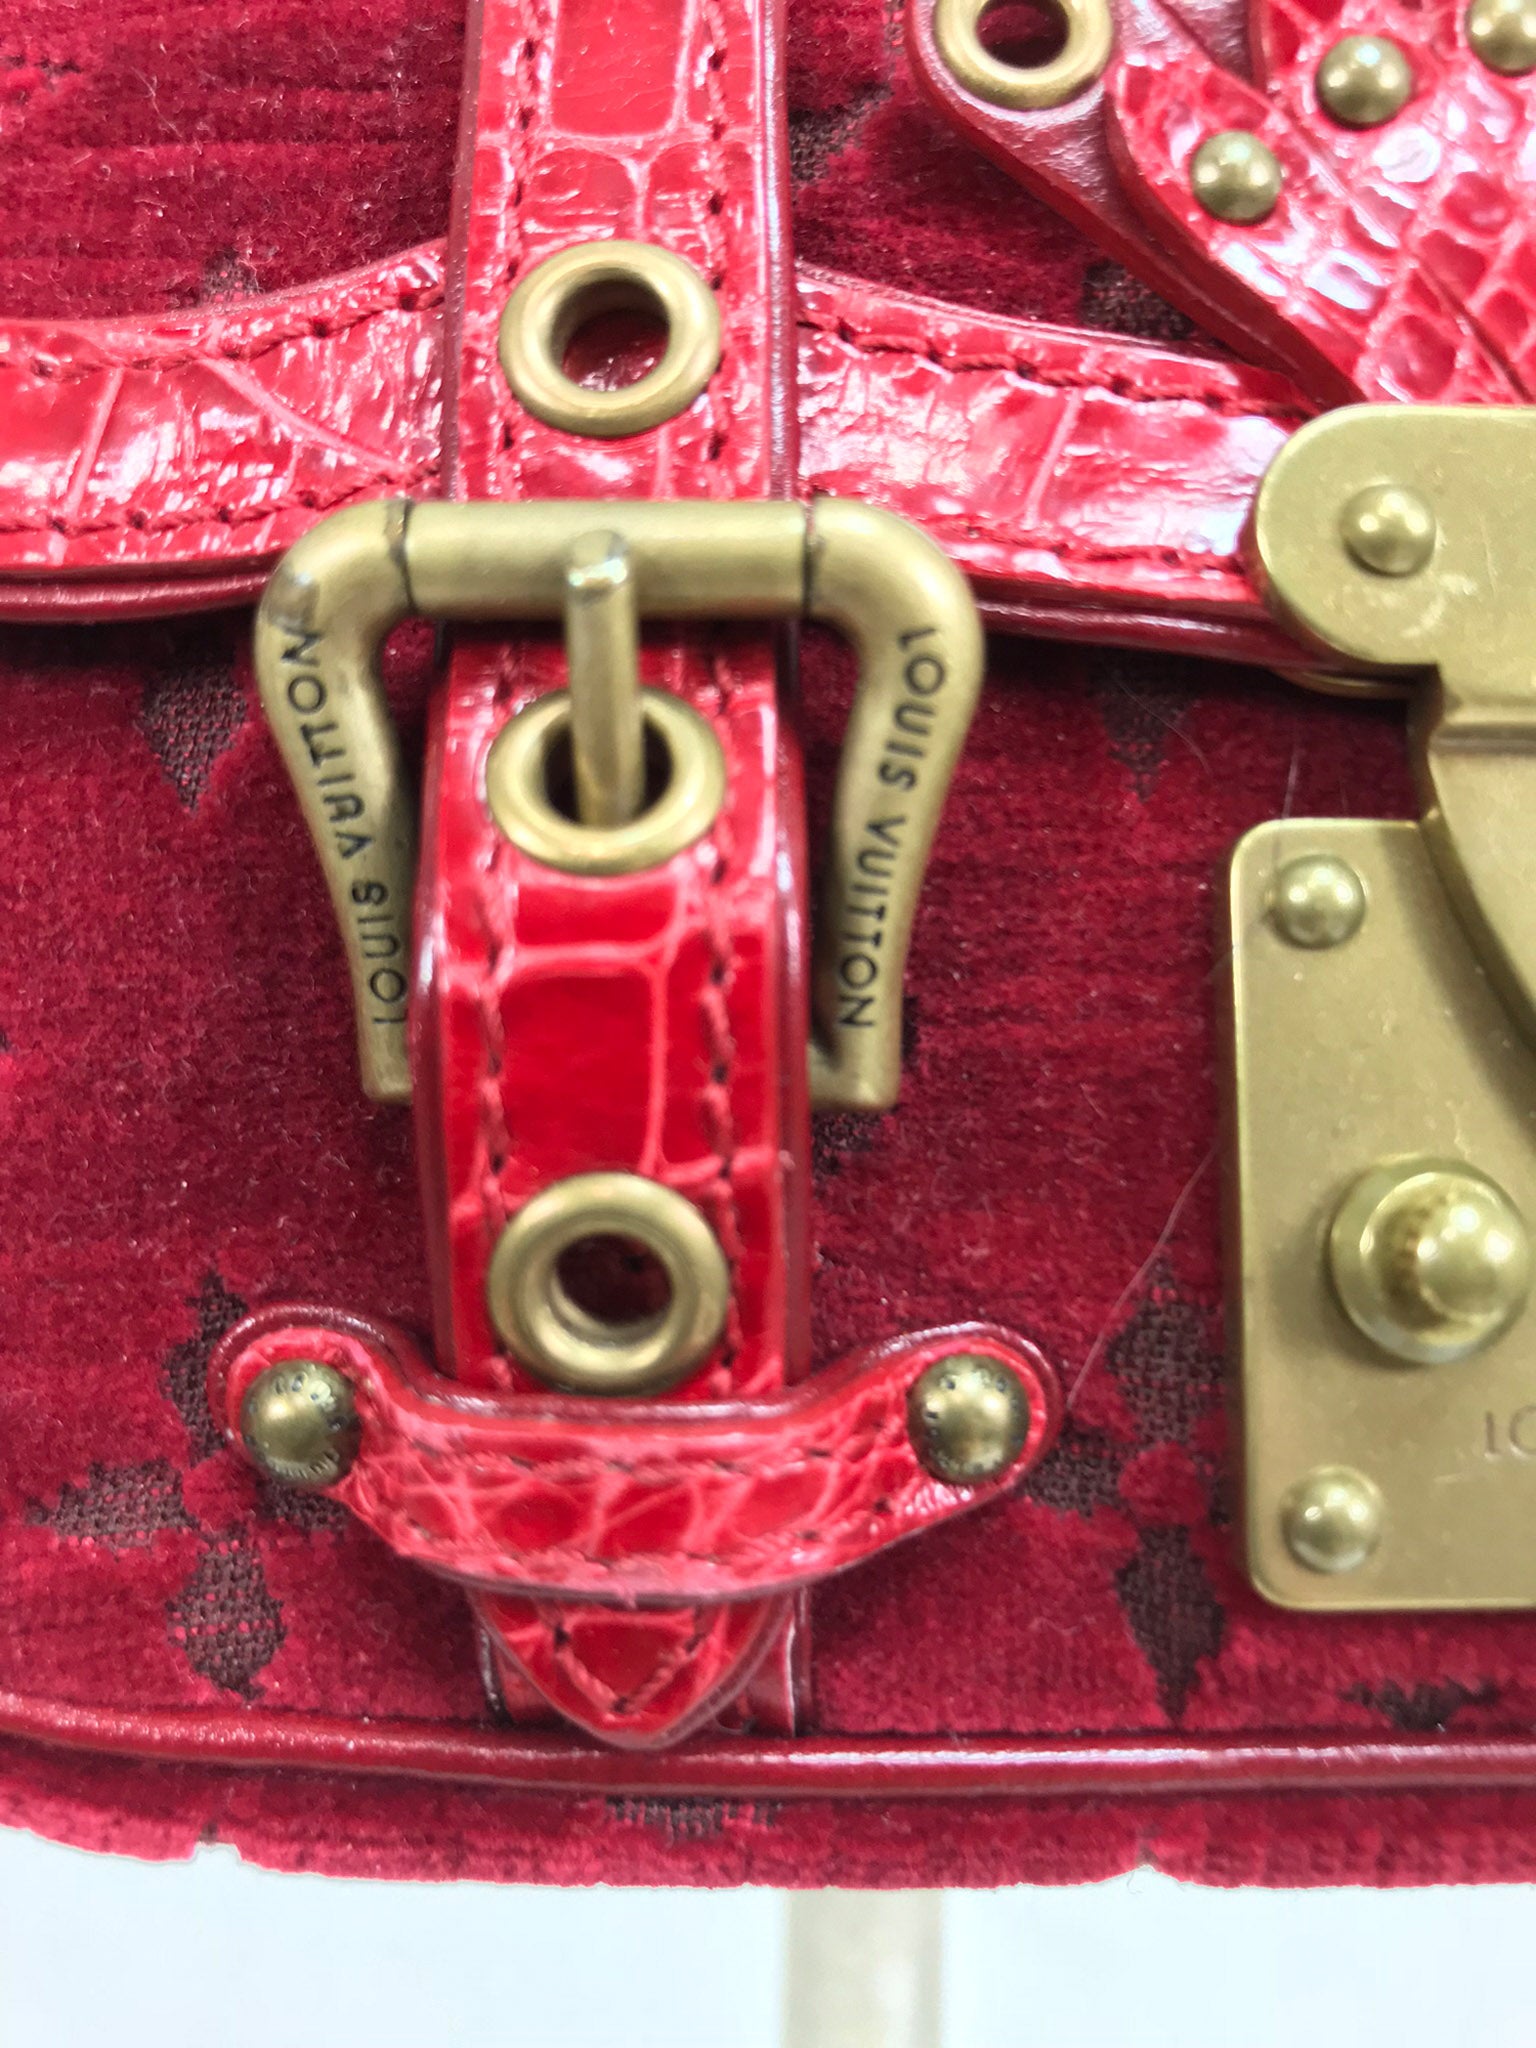 Louis Vuitton Limited Edition Red Velours and Aligator Irvine